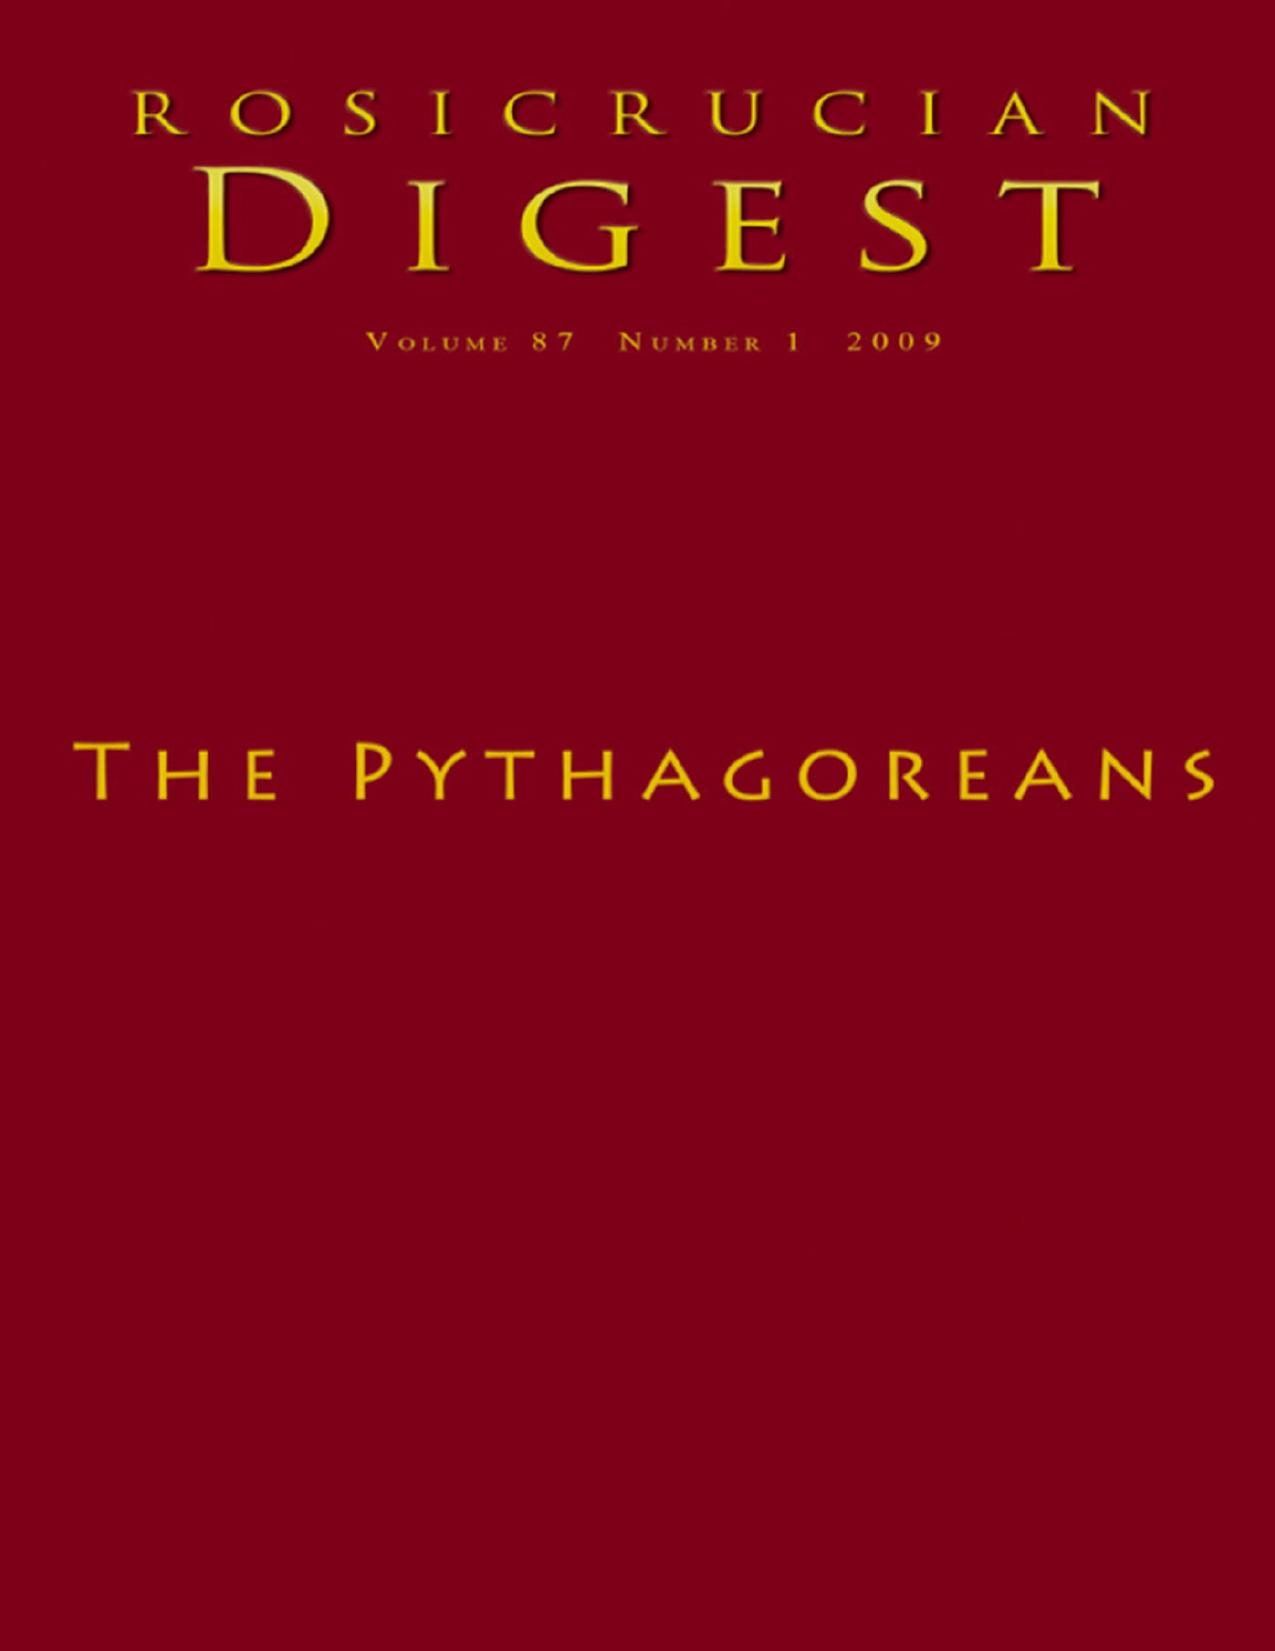 The Pythagoreans: Digest